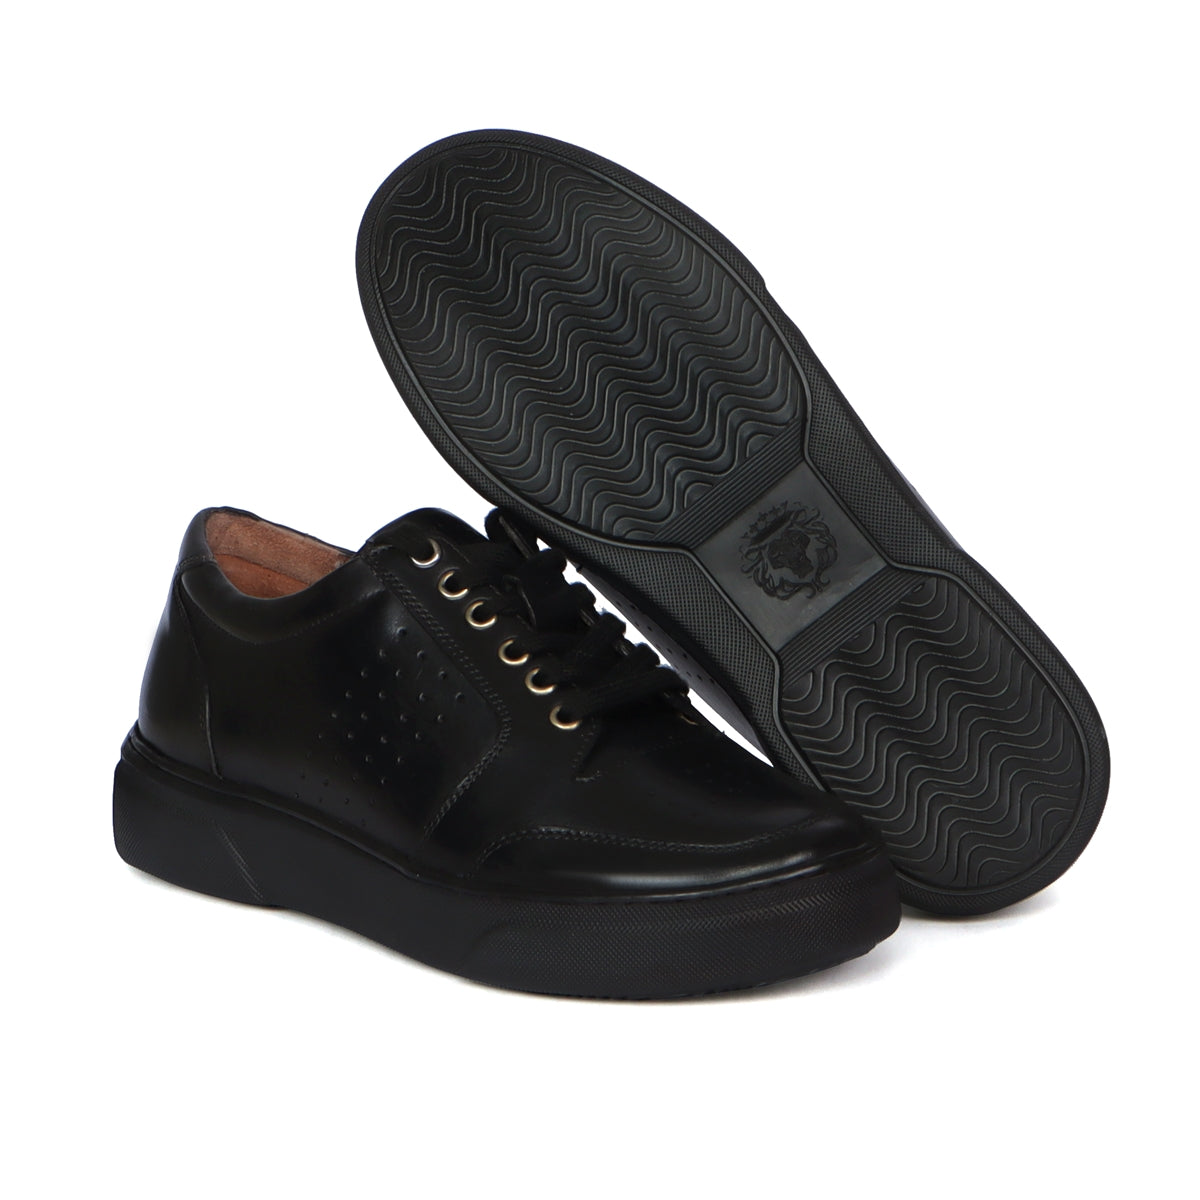 SL/61 low-top sneakers in perforated leather | Saint Laurent | YSL.com